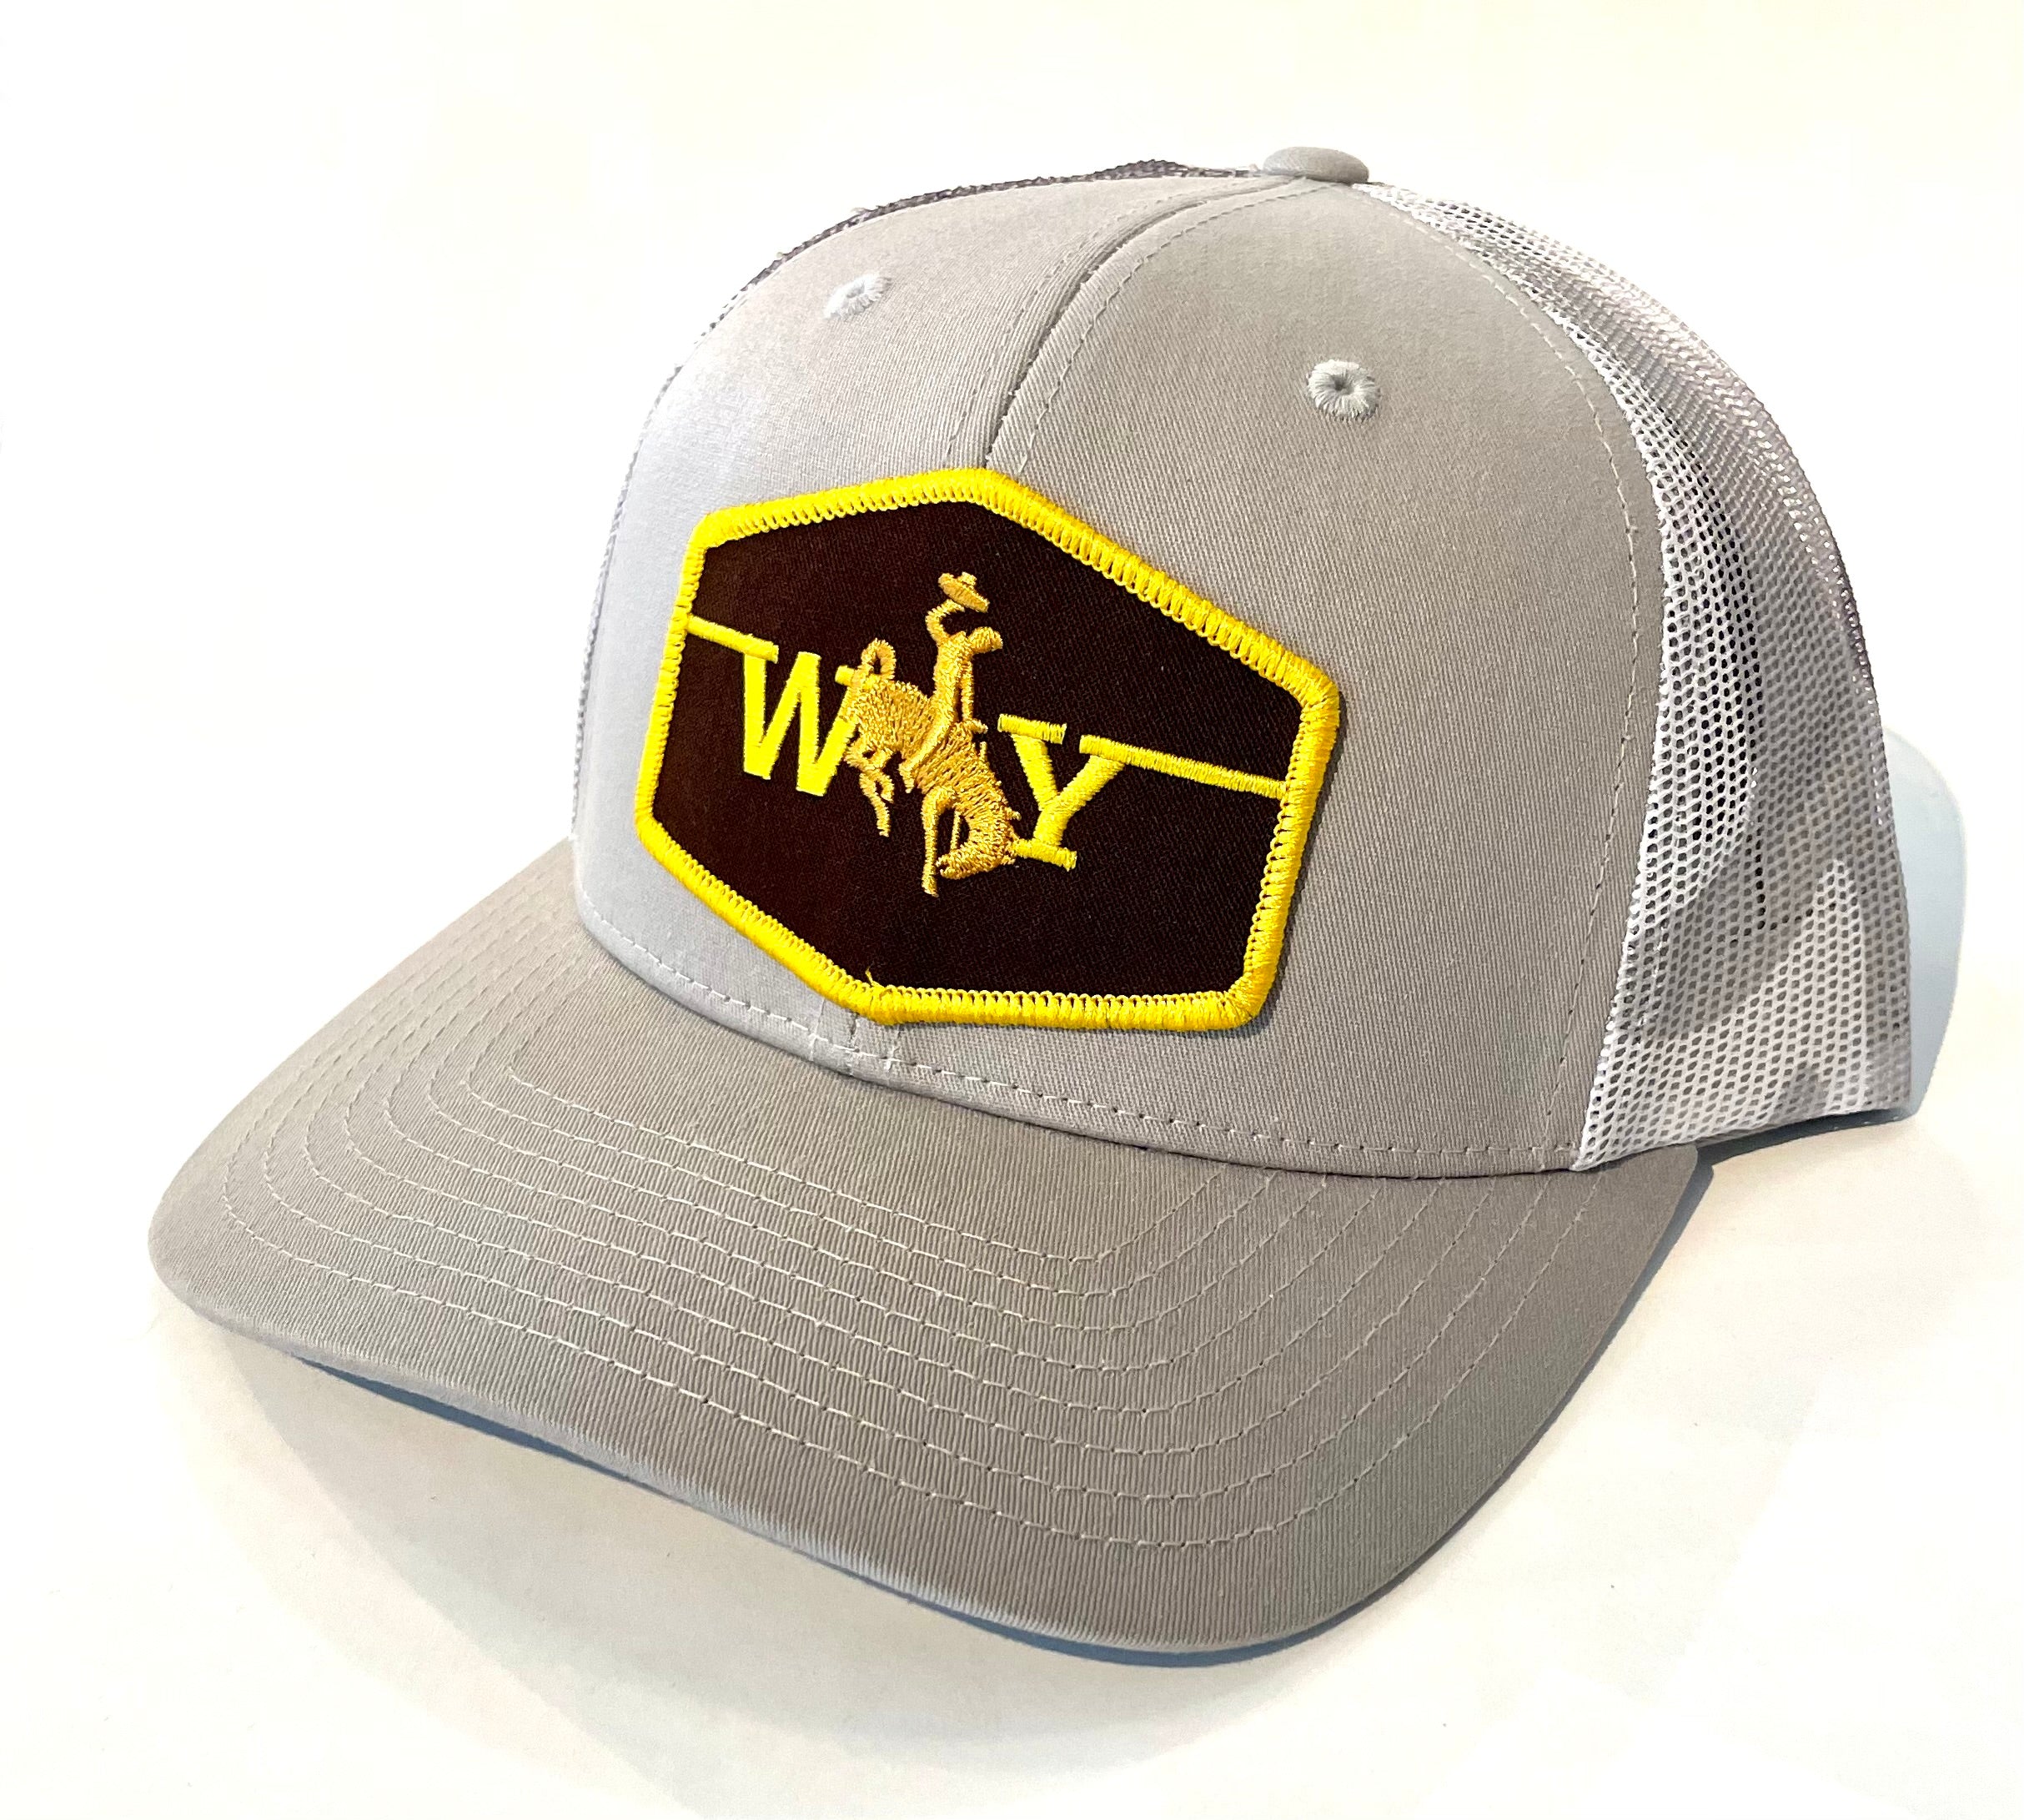 Light Grey with  White- Grey Camo Mesh Back Wyoming Bronco Hat